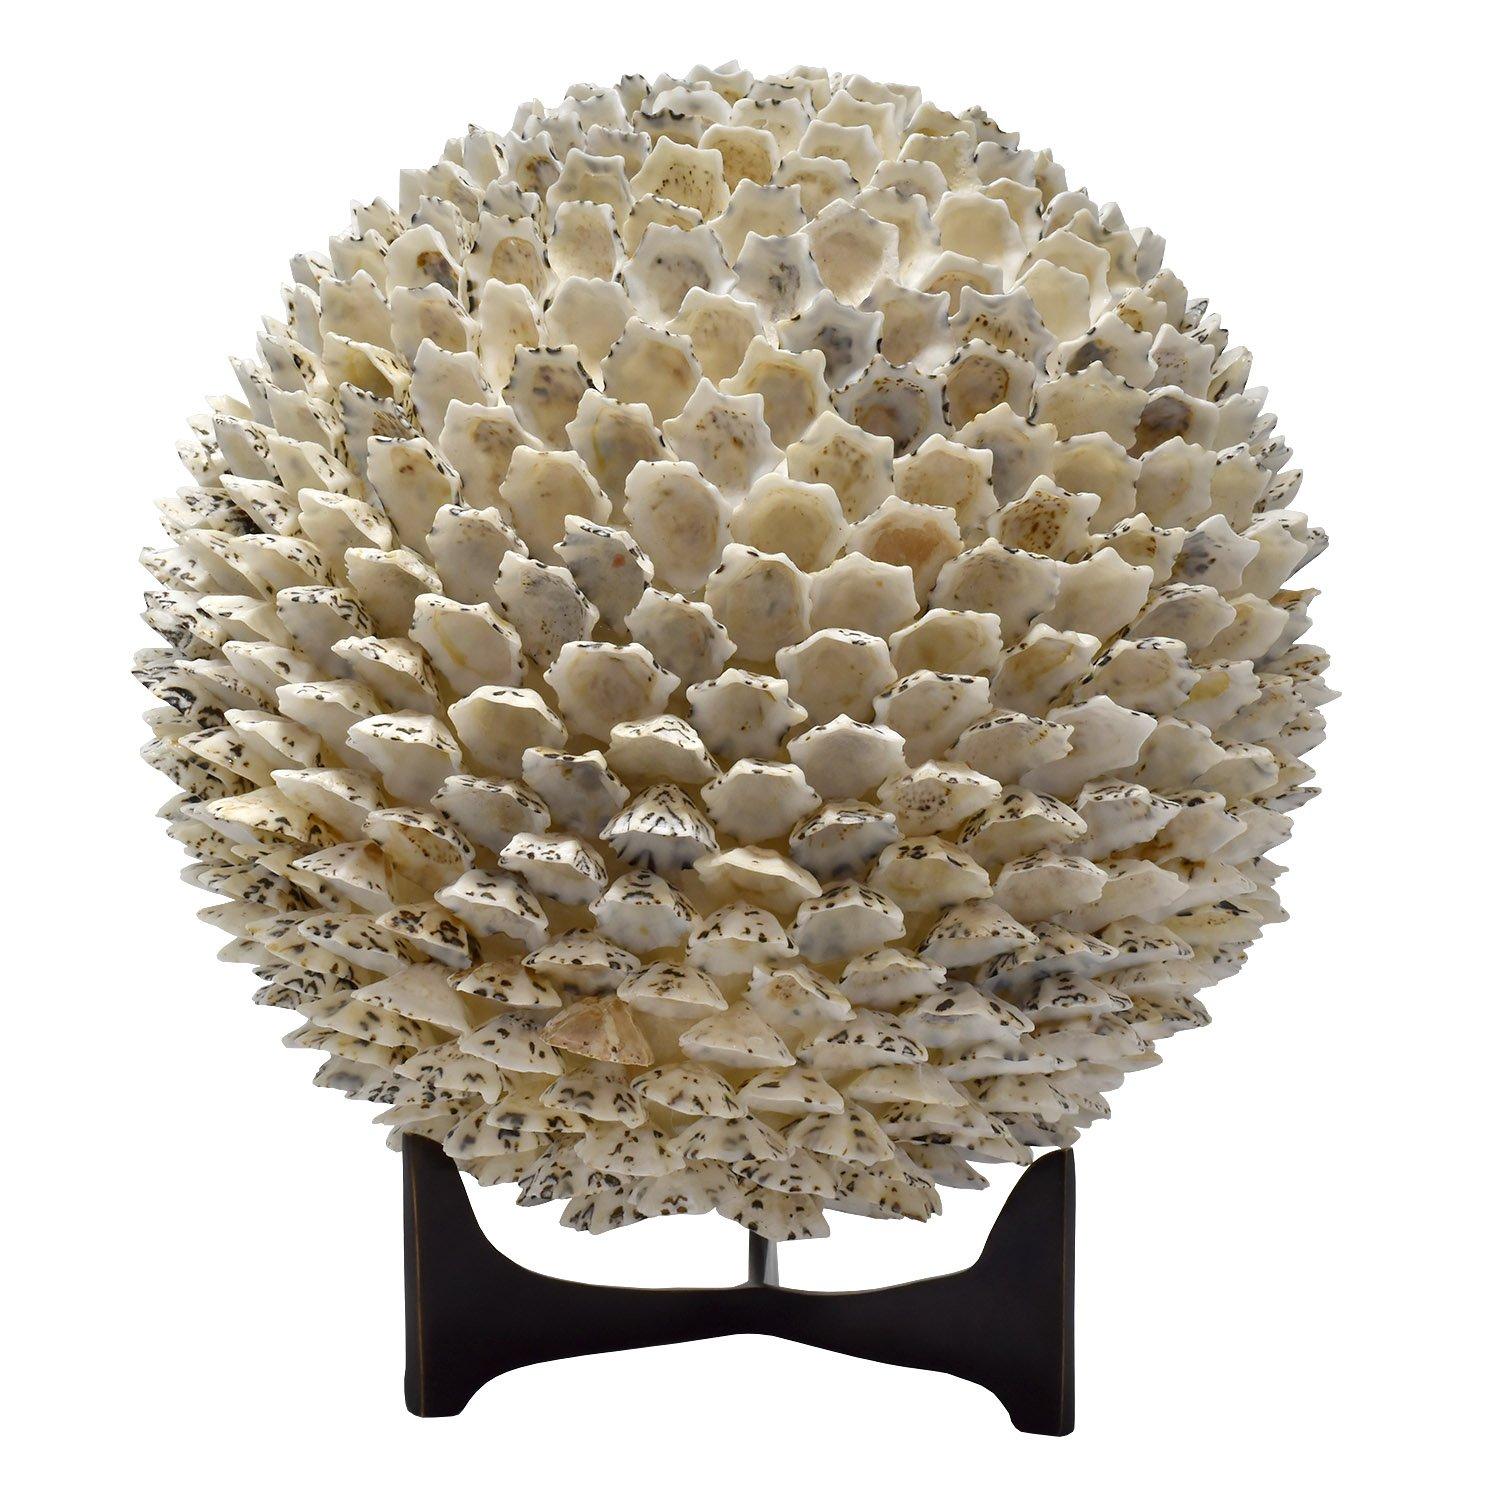 A natural shell ball of primarily white shells attached at one end of the shell. The result is a highly textured round form of organic material. Made from limpet shells.

Can be used with or without the black stand.

Measures: height on display